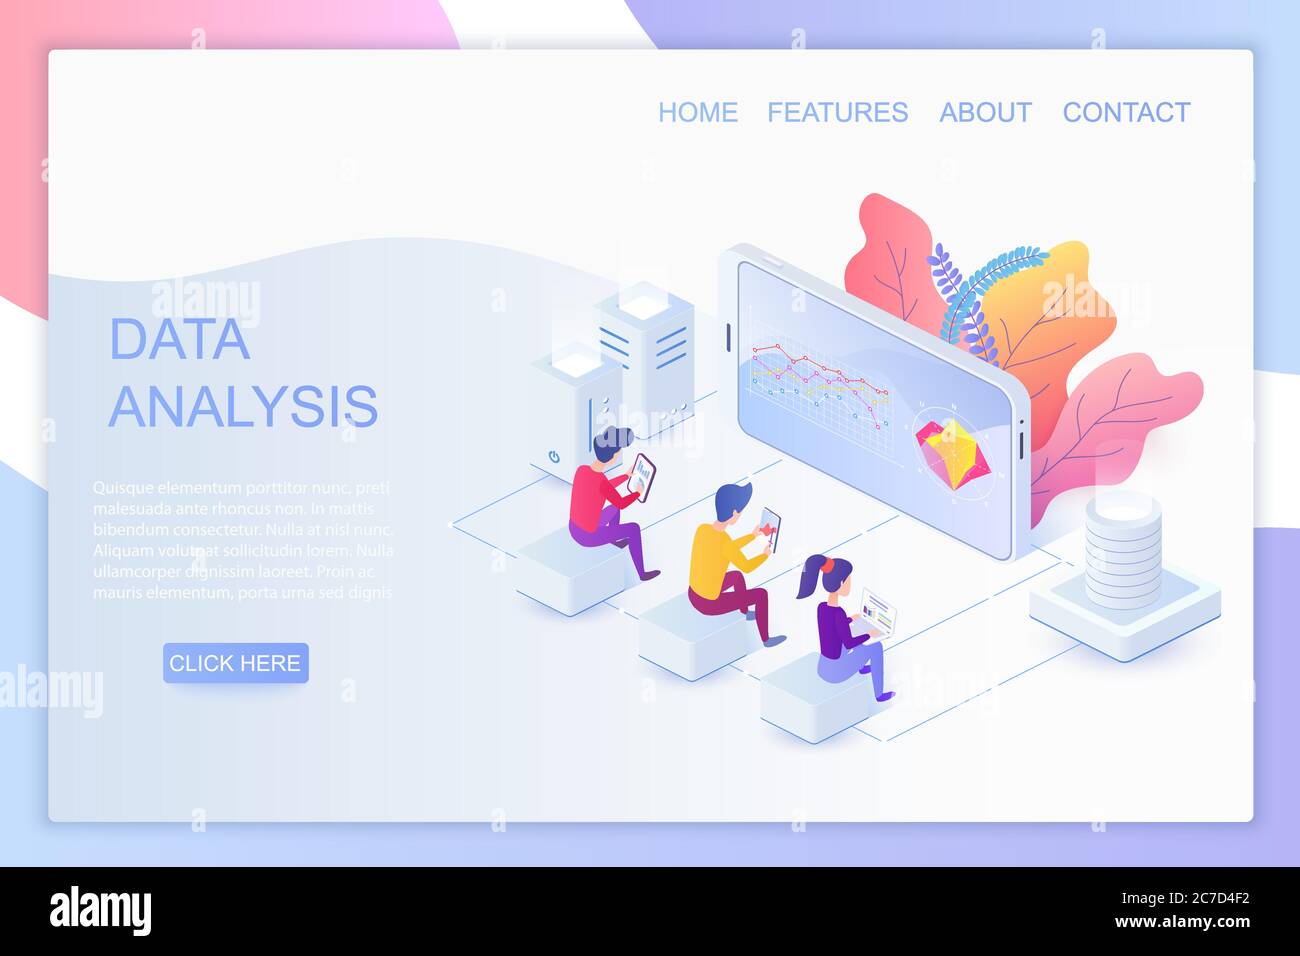 Web analytics isometric landing page vector template. Big data analysis website design layout. Usability testing and user experience 3d concept illustration. App, application development Stock Vector